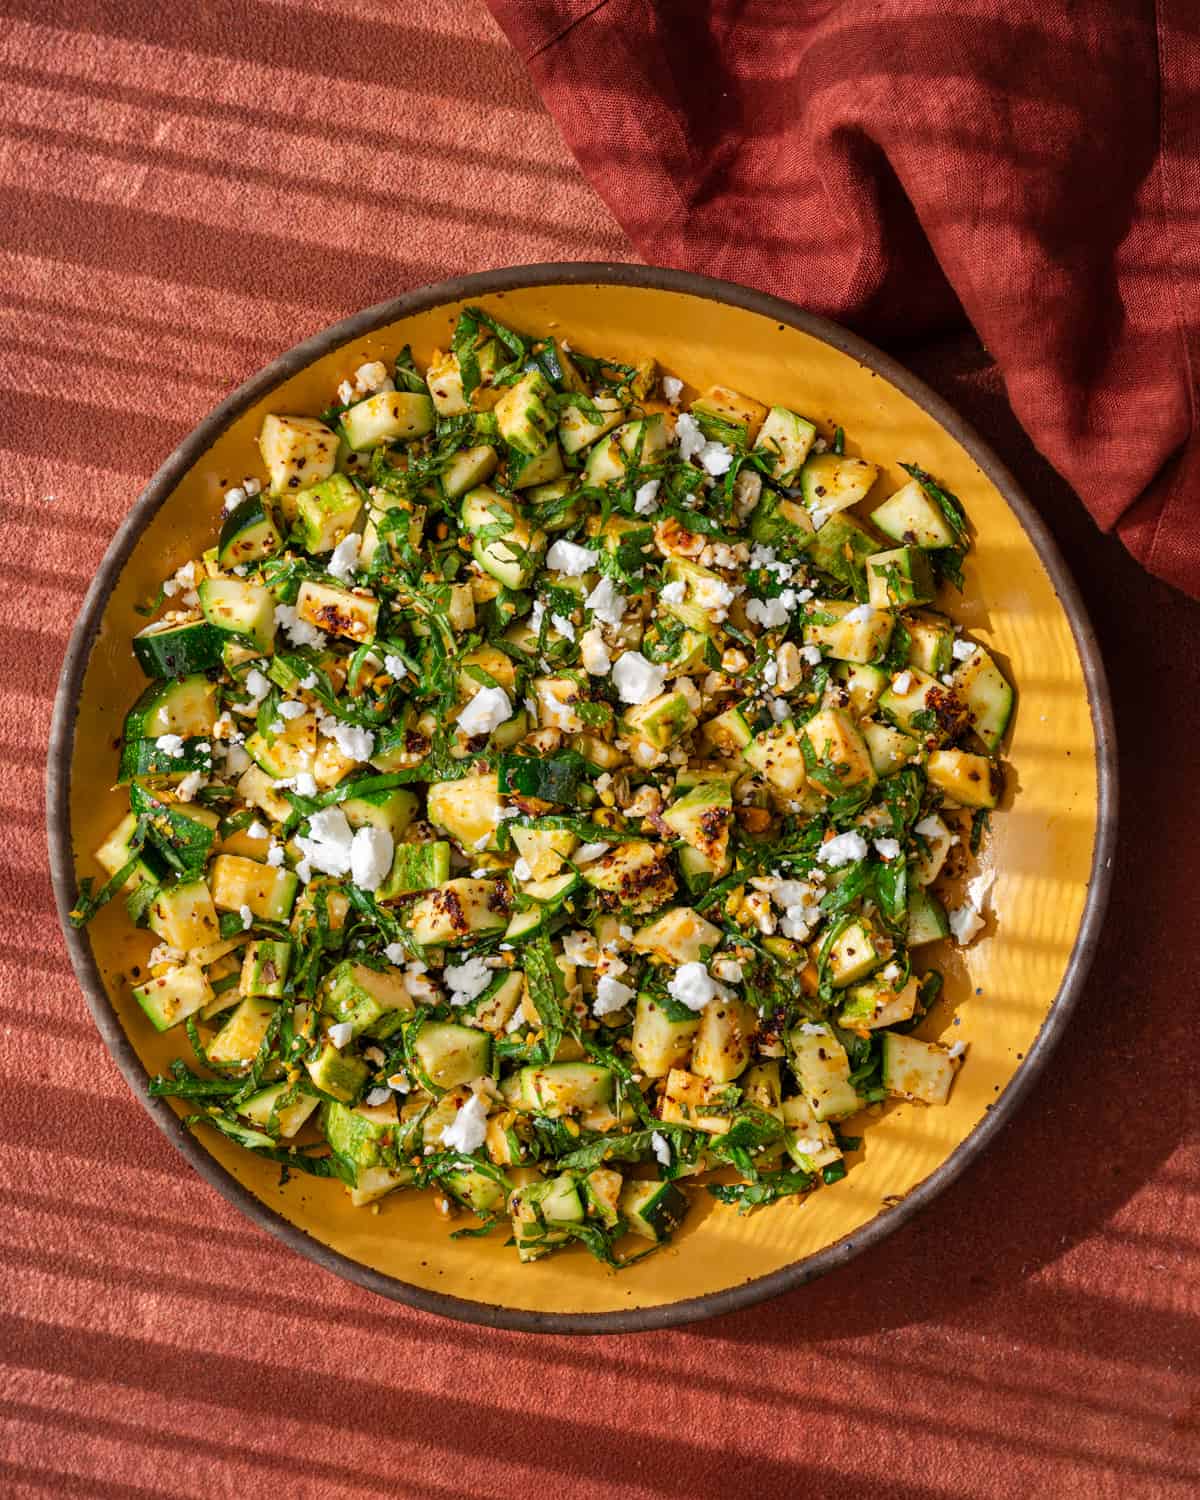 zucchini salad tossed with chili oil, pistachios, feta, basil, and mint in a yellow bowl on a red surface.